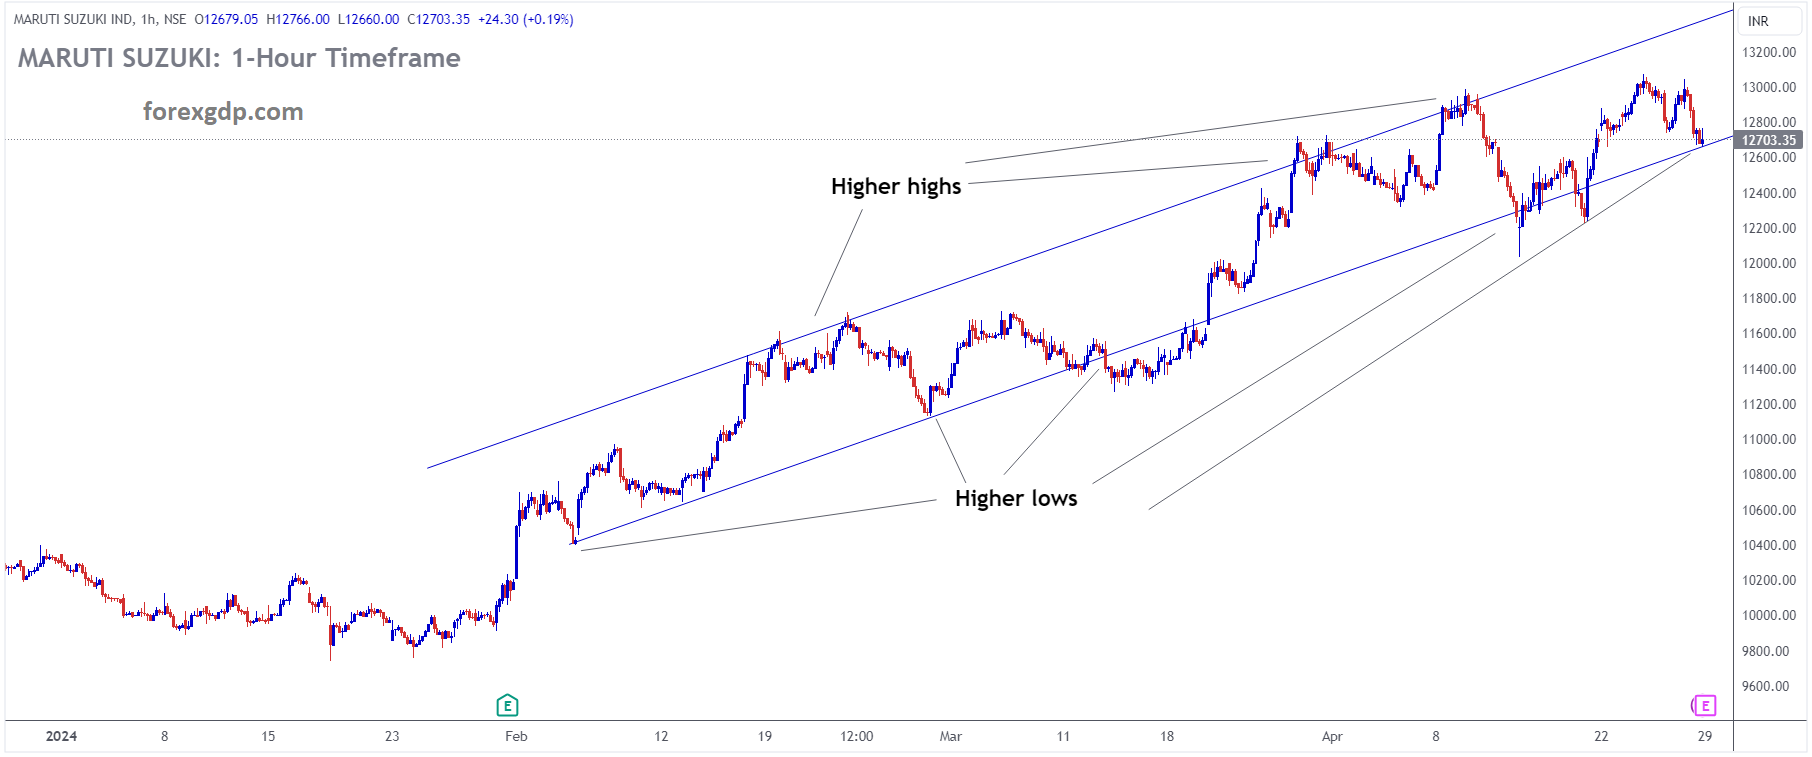 MARUTI SUZUKI Market Price is moving in Ascending channel and market has reached higher low area of the channel